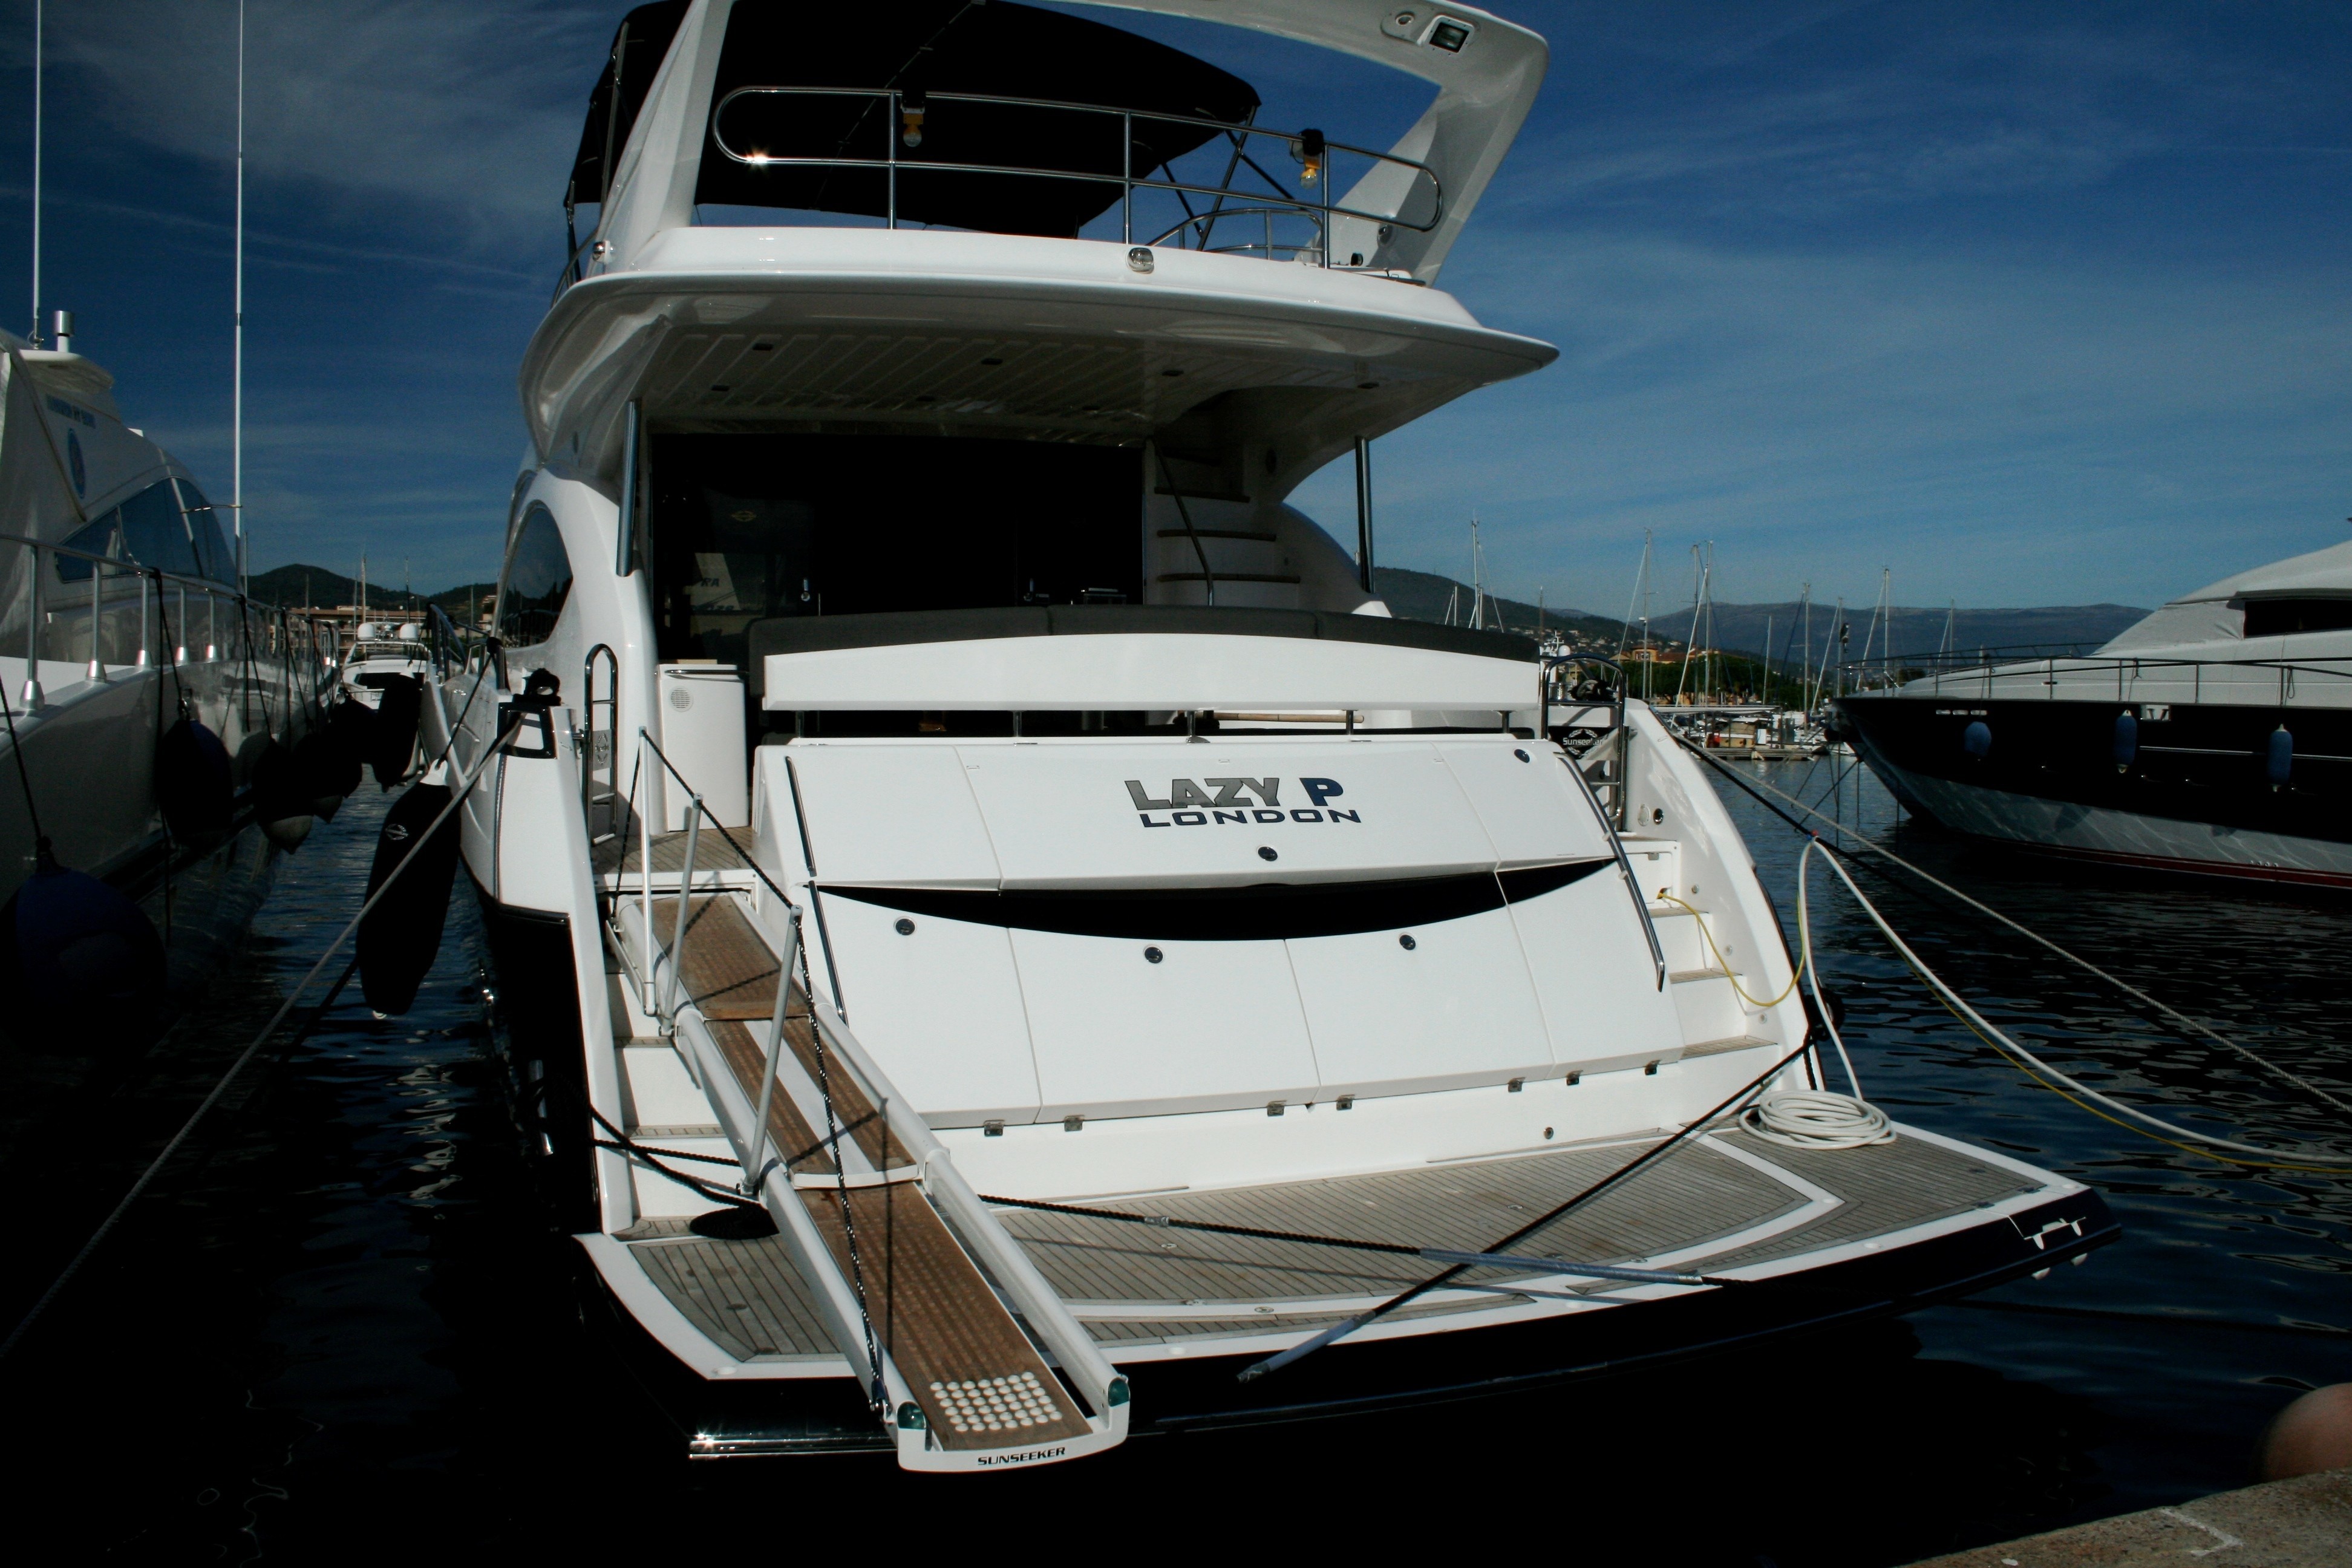 The 22m Yacht LAZY P